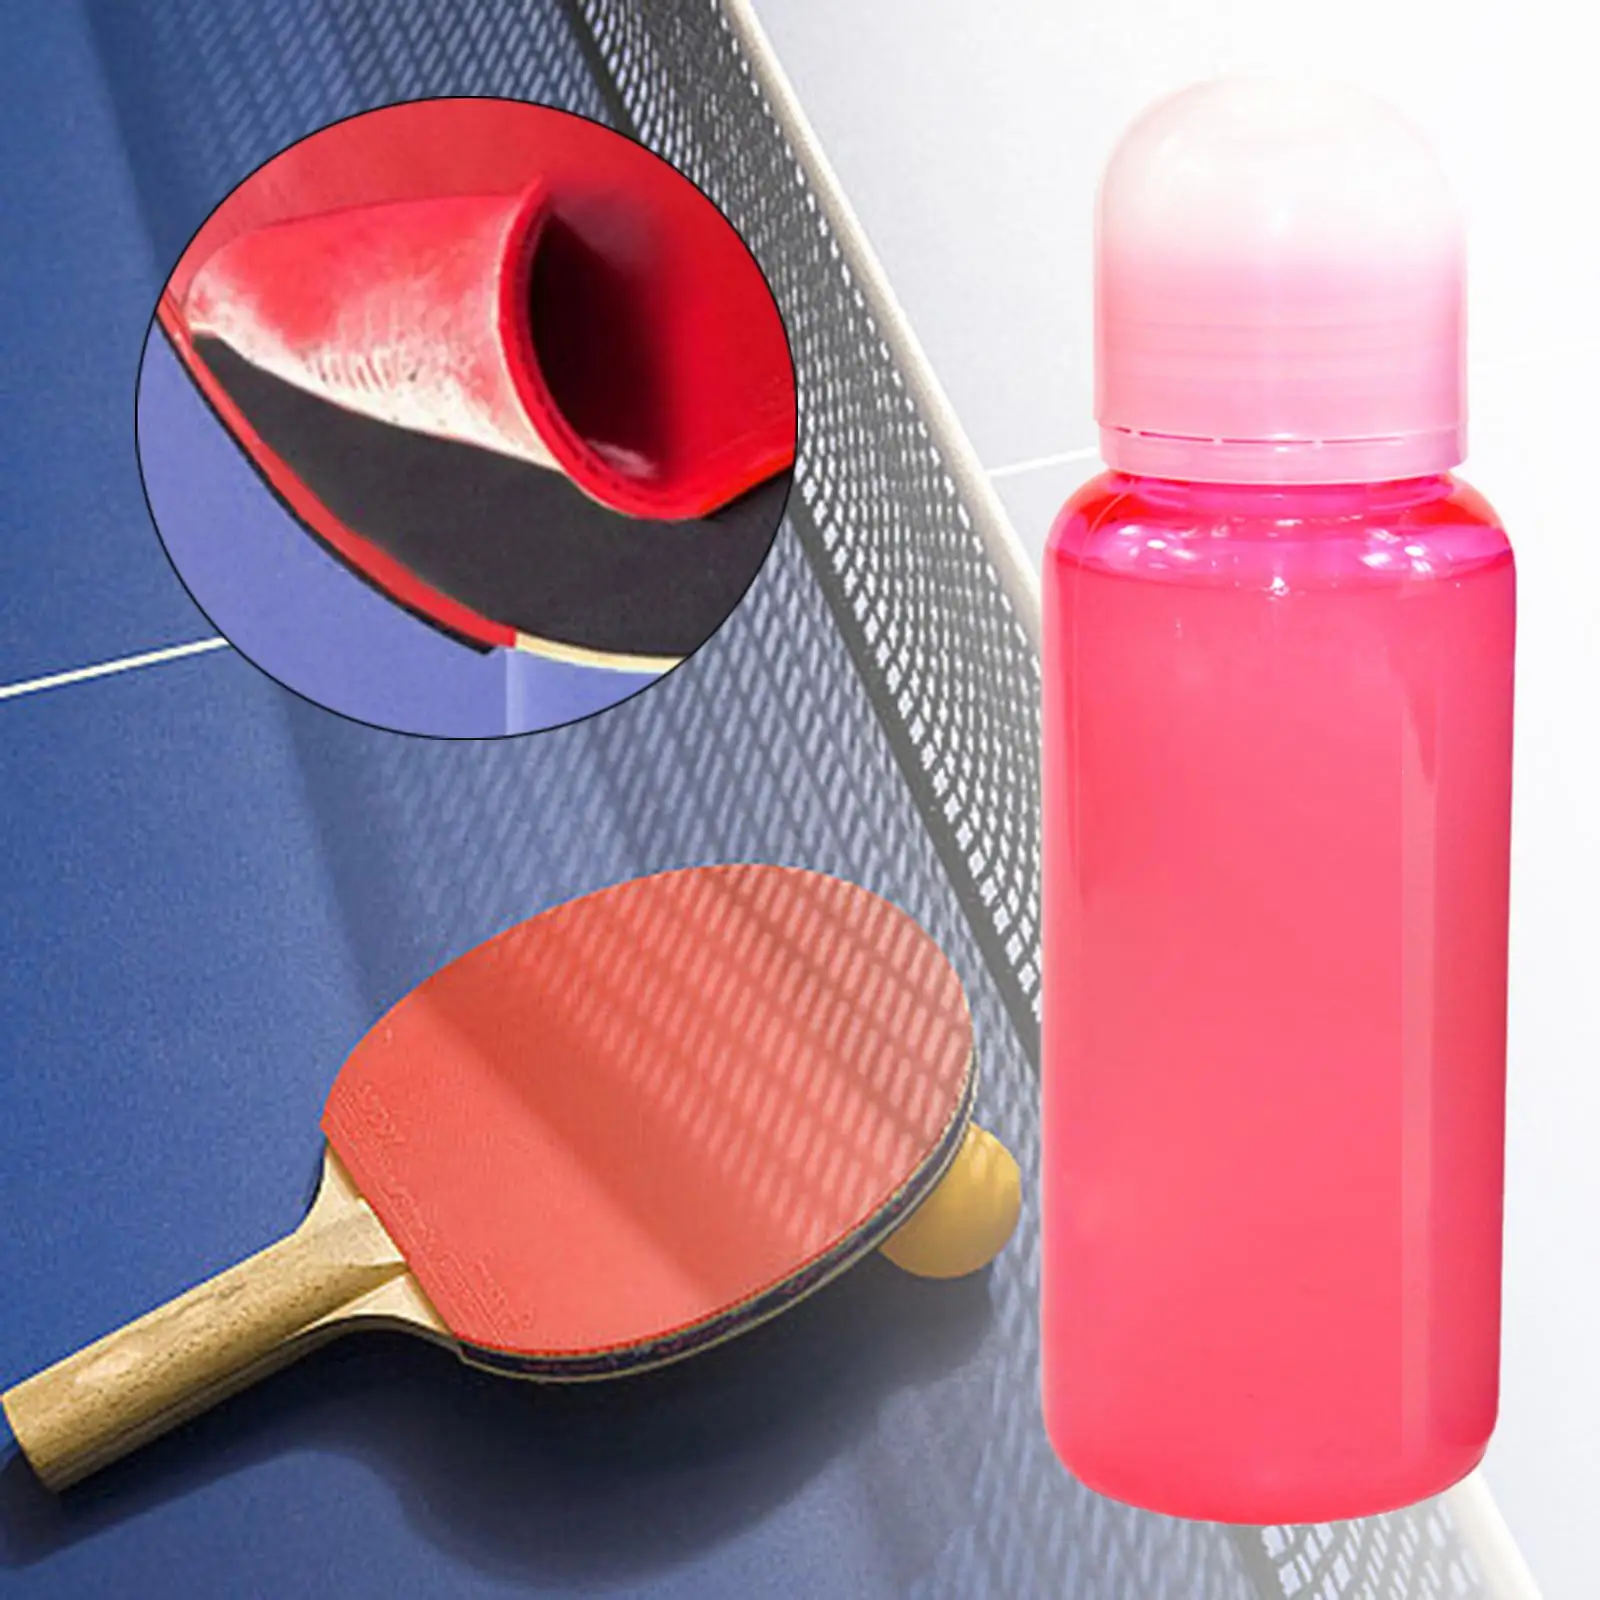 250ml Liquid Glue for Paddle Pingpong Paddles Glue Improve Ball Speeds High Quality with Built-in Brush Table Tennis Glue